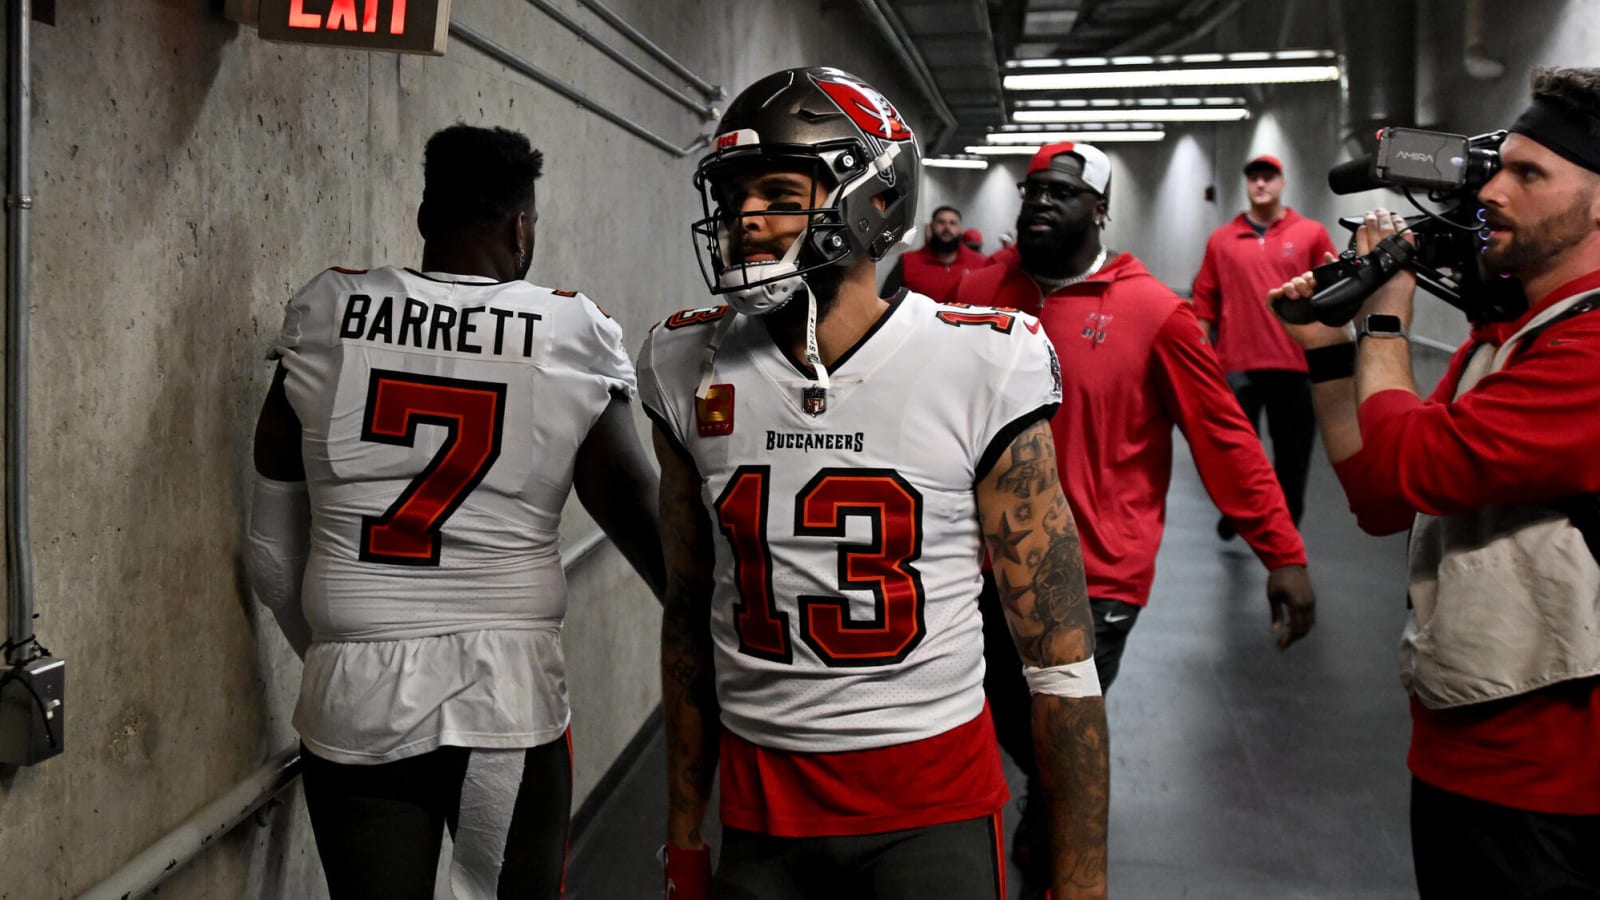 Mike Evans strikes a deal to stay with the Buccaneers | Yardbarker